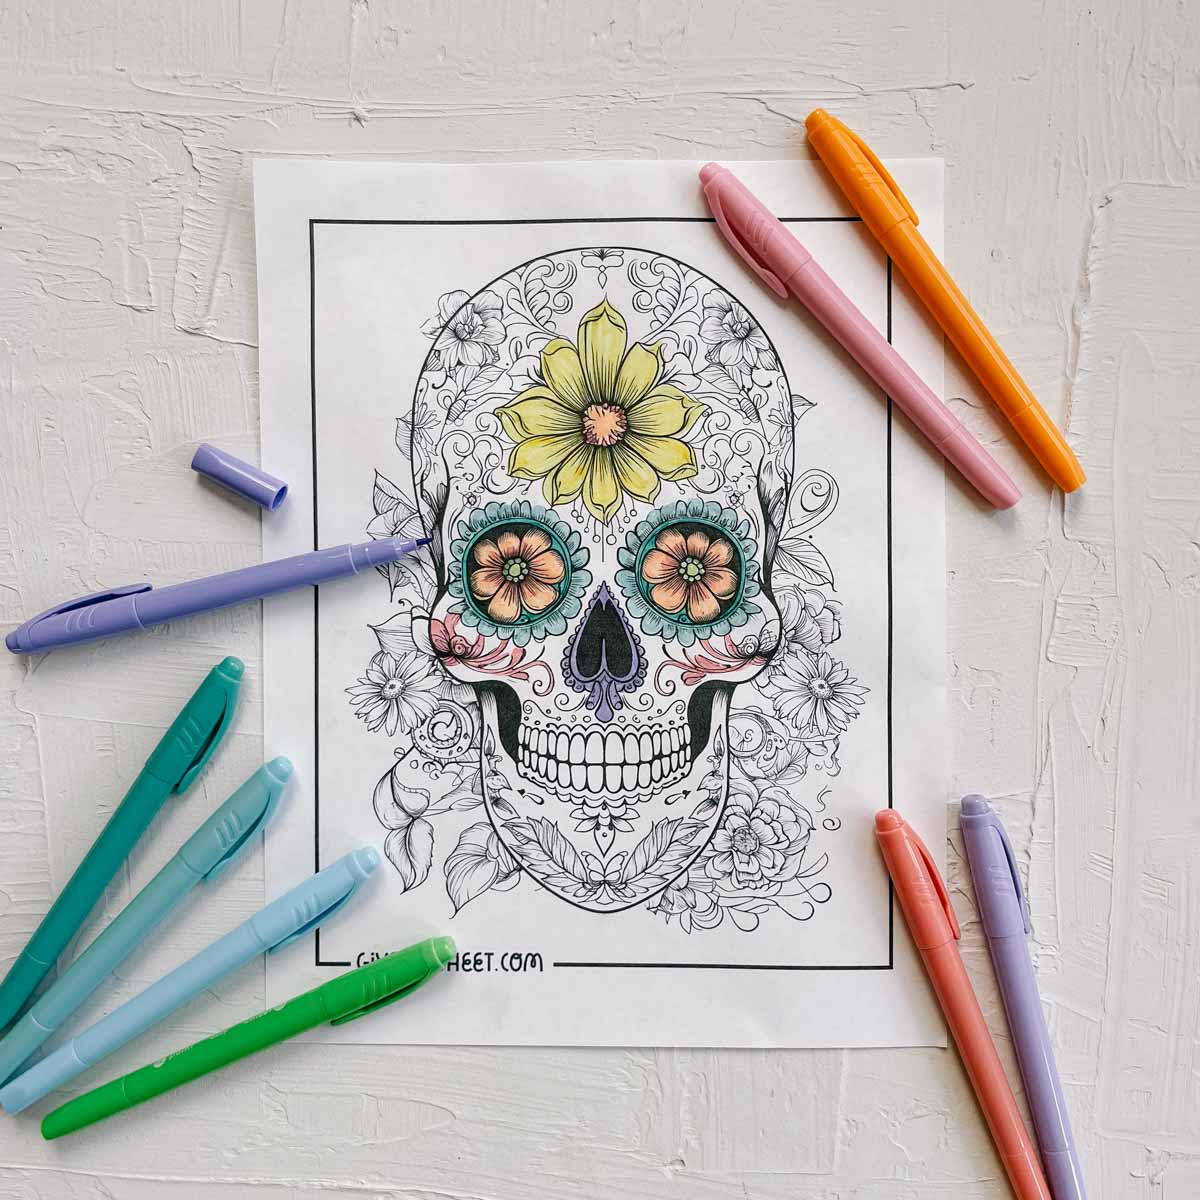 A detailed sugar skull coloring sheet in progress of being colored.